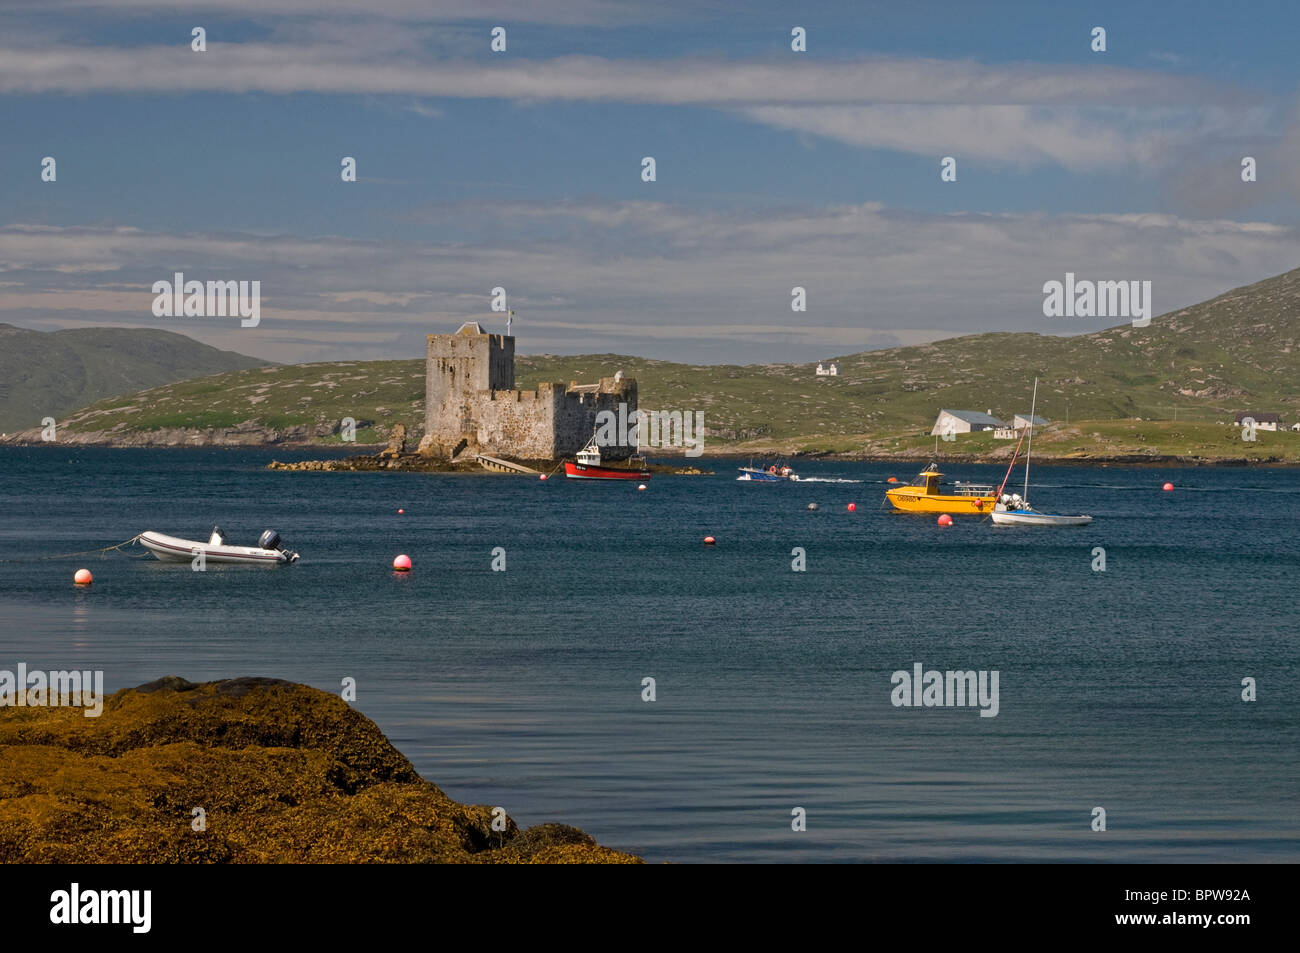 Kisimul Castle sits in Castlebay on the Island of Barra, Outer Hebrides Western Isles. Scotland.   SCO 6530 Stock Photo